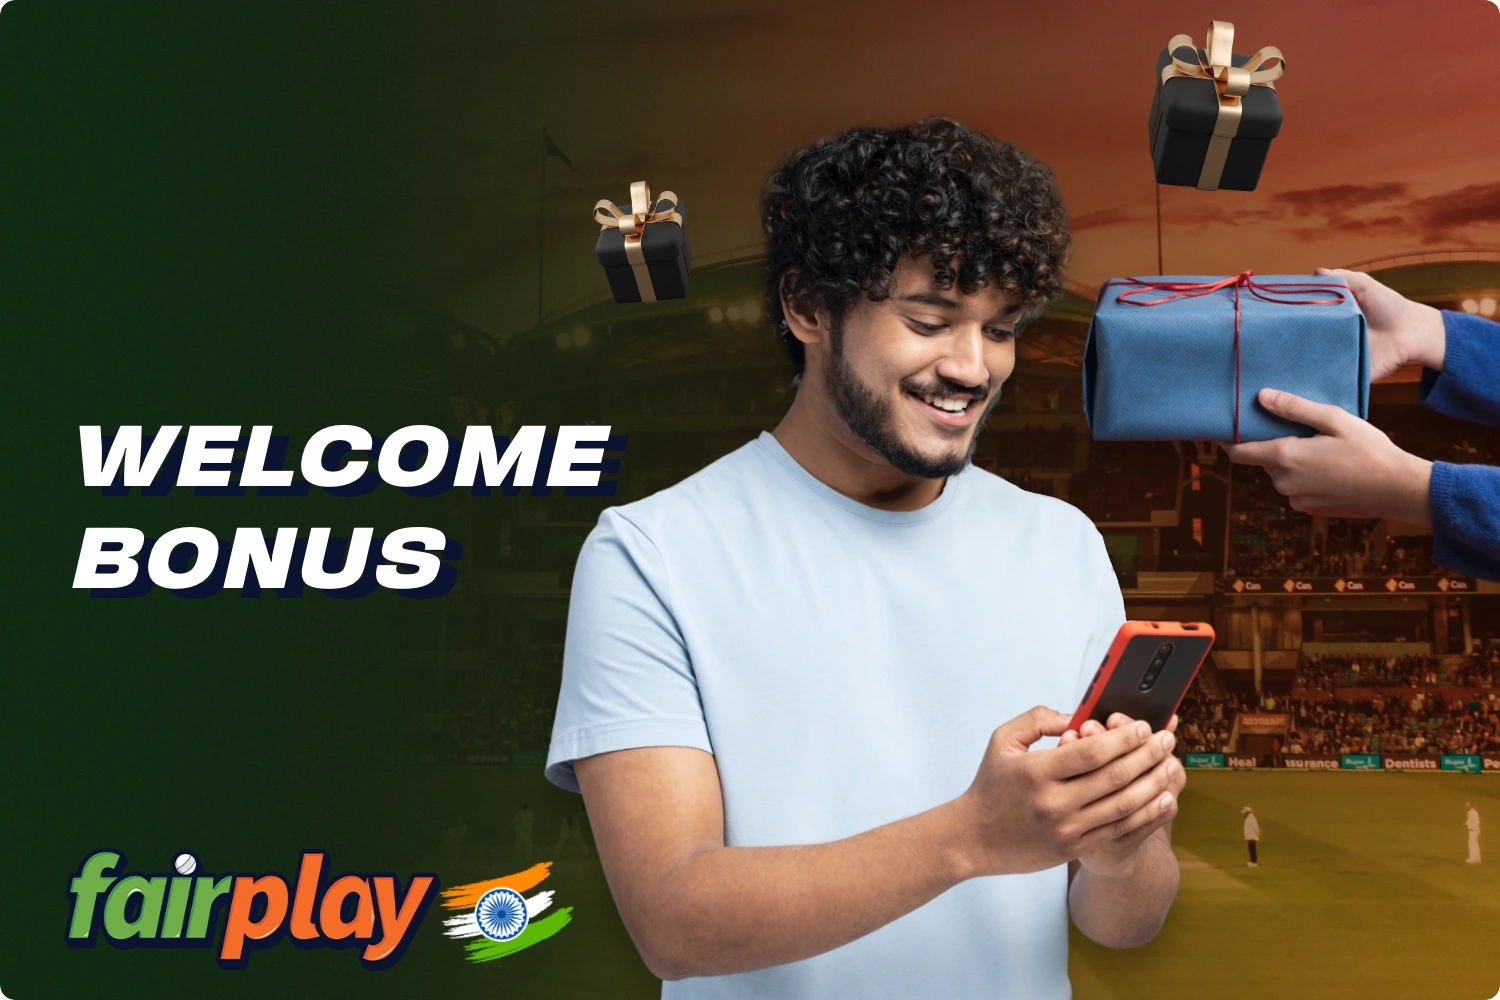 Fairplay welcome bonus is available for new players from India